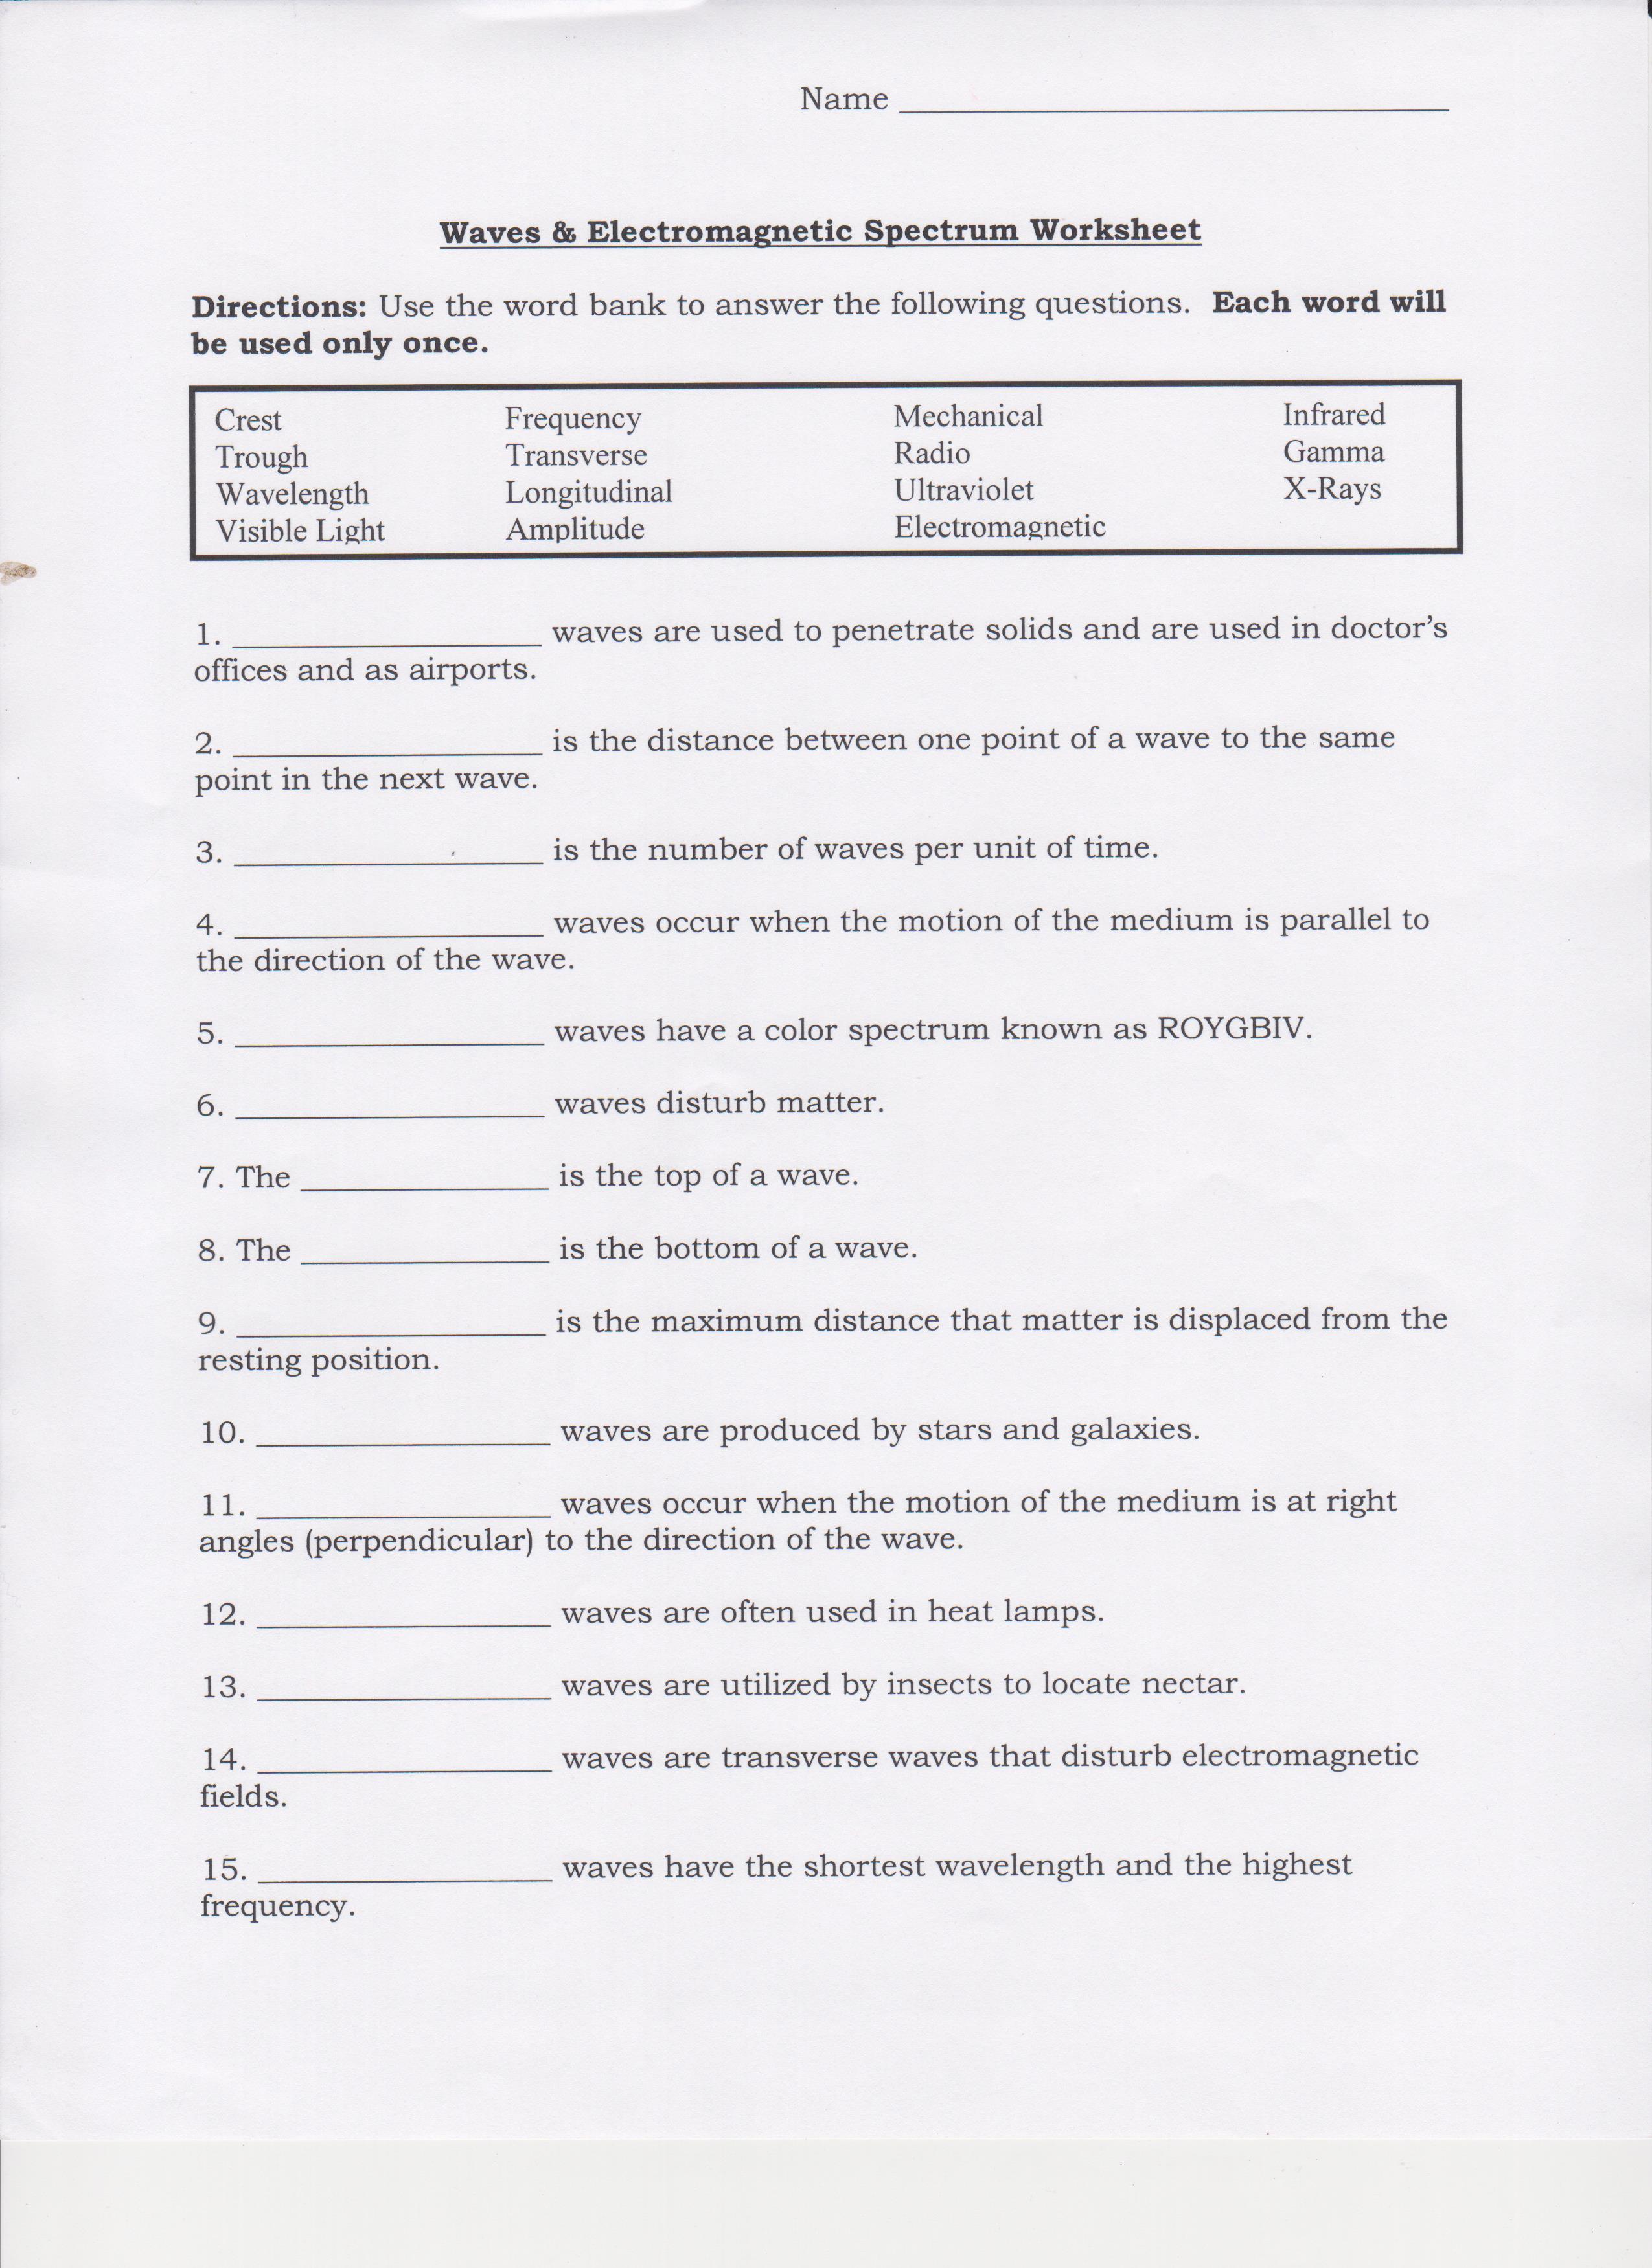 Class Work Within Electromagnetic Spectrum Worksheet Answers